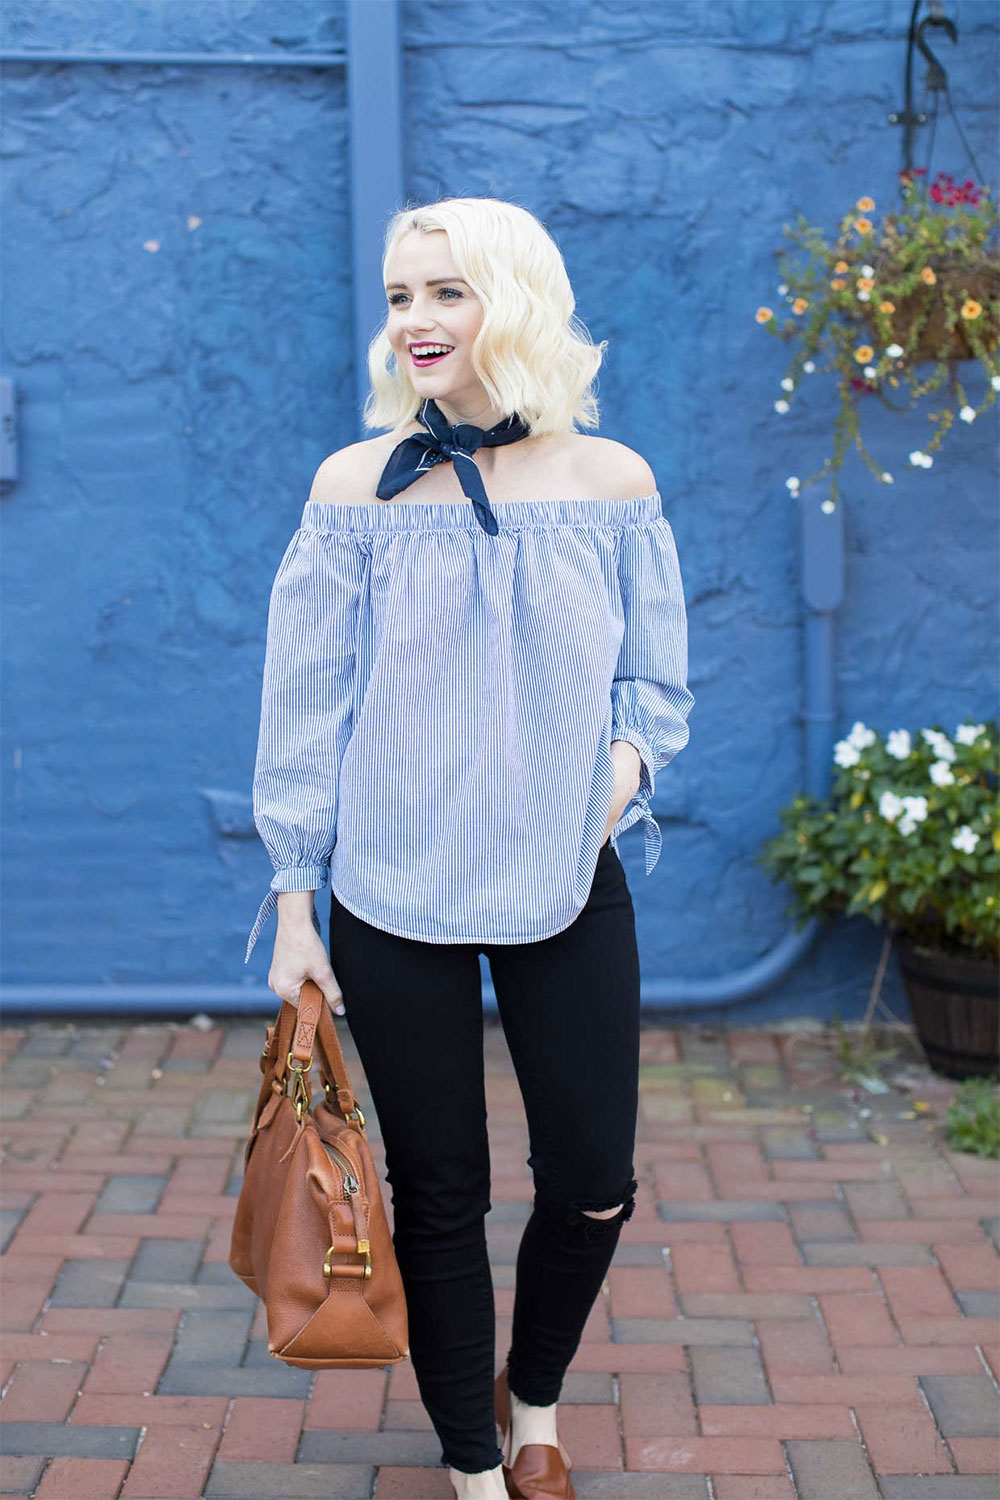 off the shoulder outfit